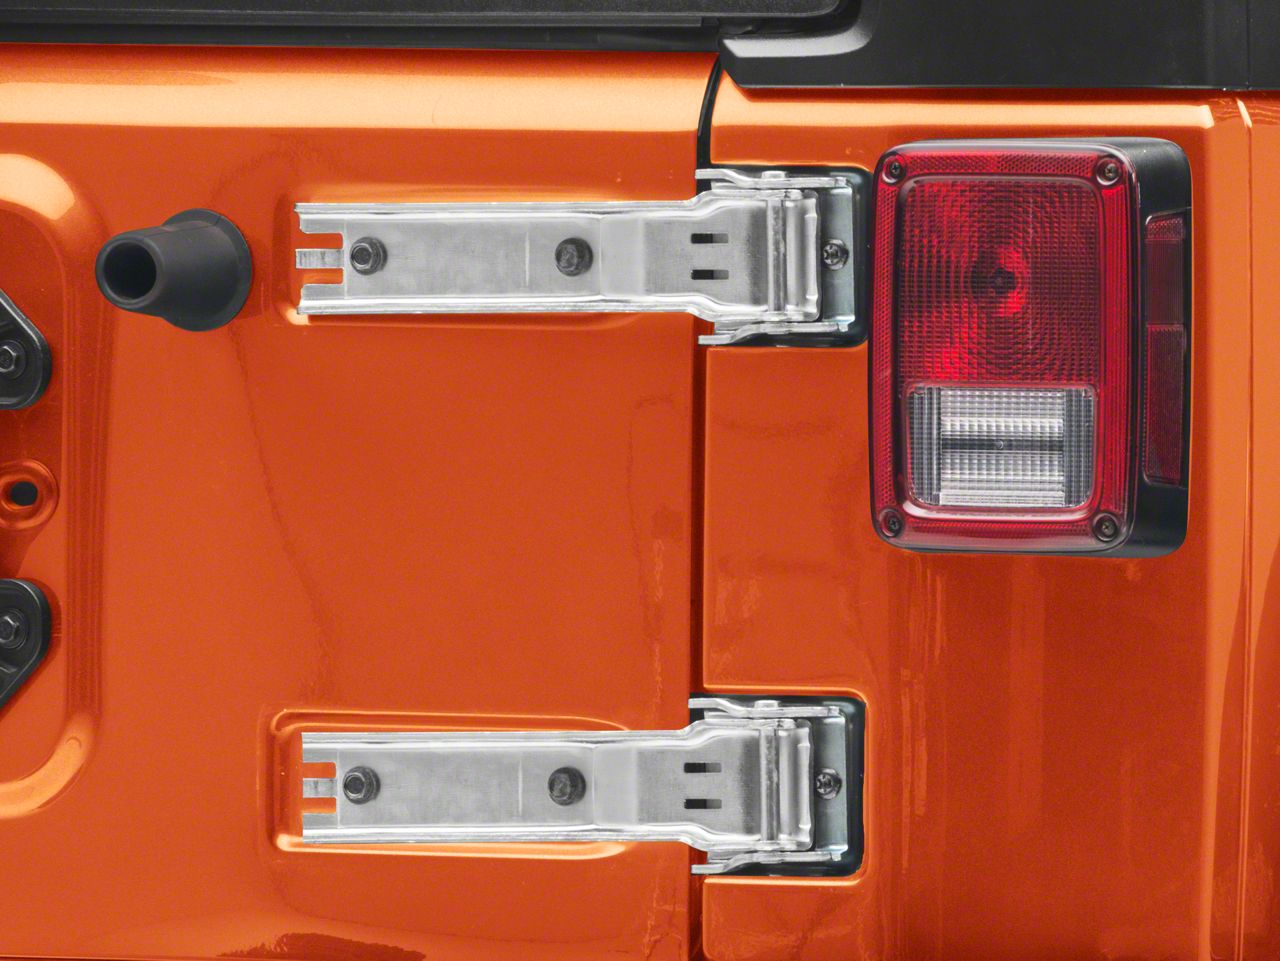 Red Nicebee 2pcs/Set ABS Tailgate Hinge Cover Rear Upper Glass Door Liftgate Hinge Decoration Trim Cover for Jeep Wrangler JL 2018+